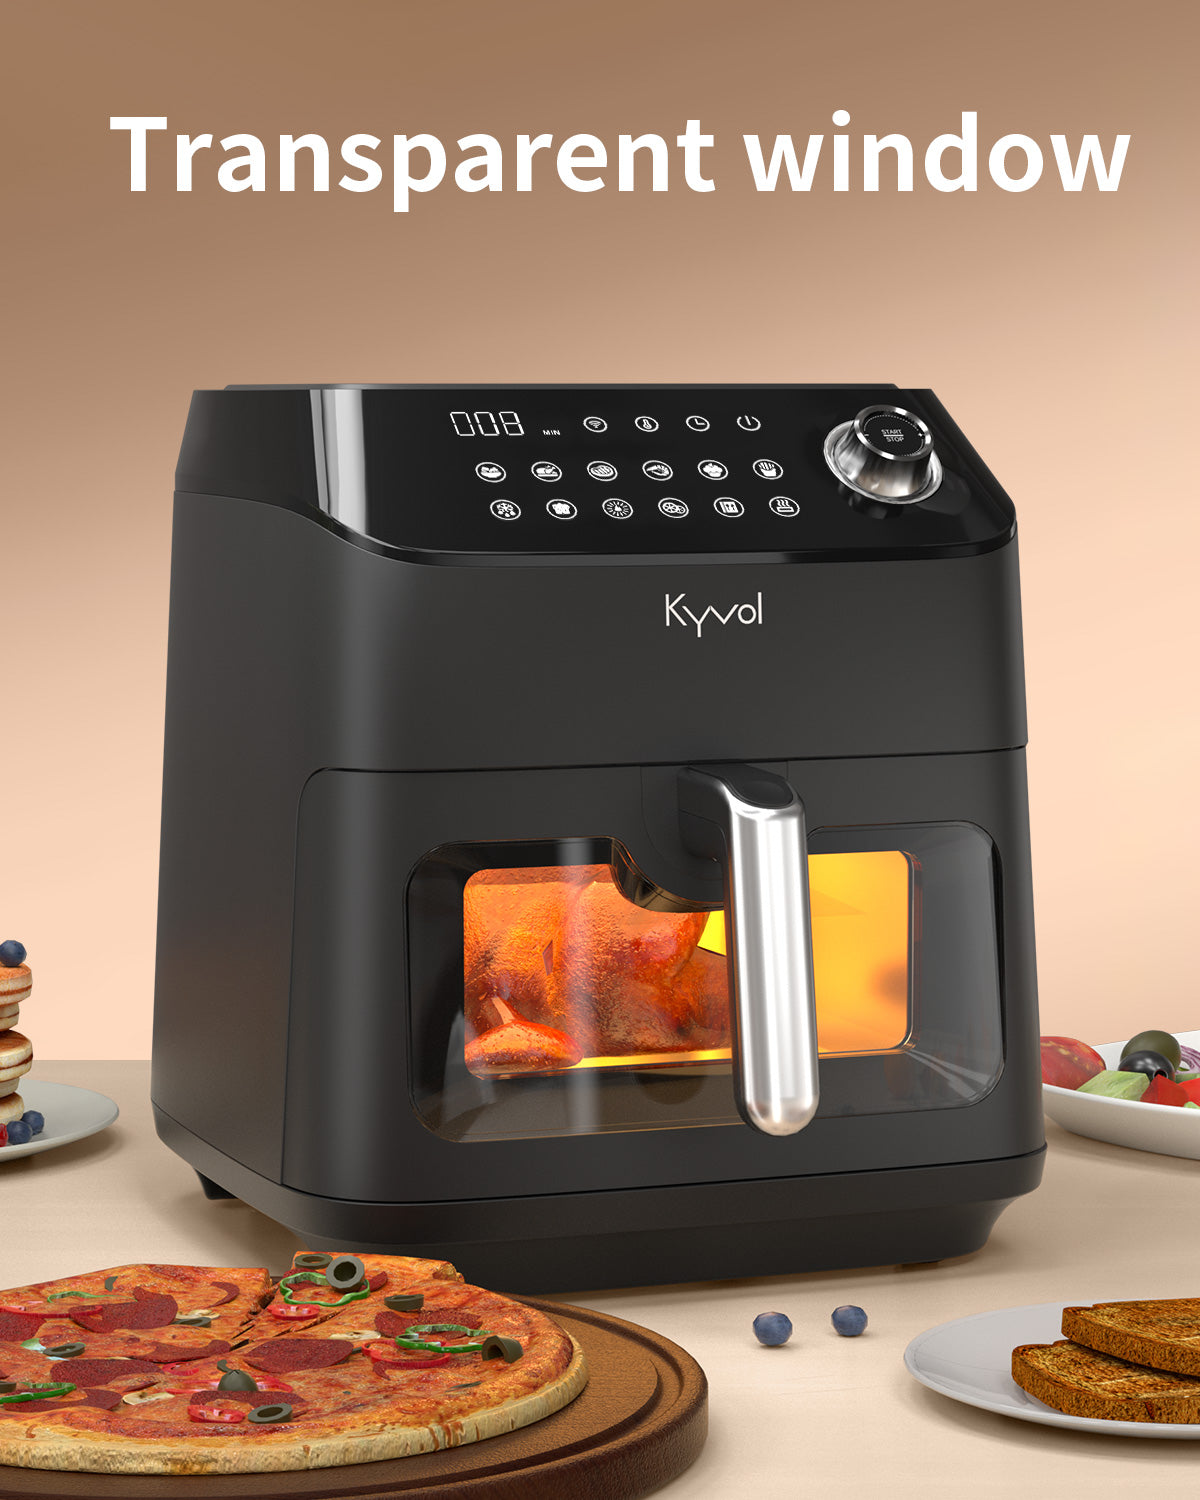 Kyvol Epichef AF60 Air Fryer 6QT Large Capacity with Viewing Window